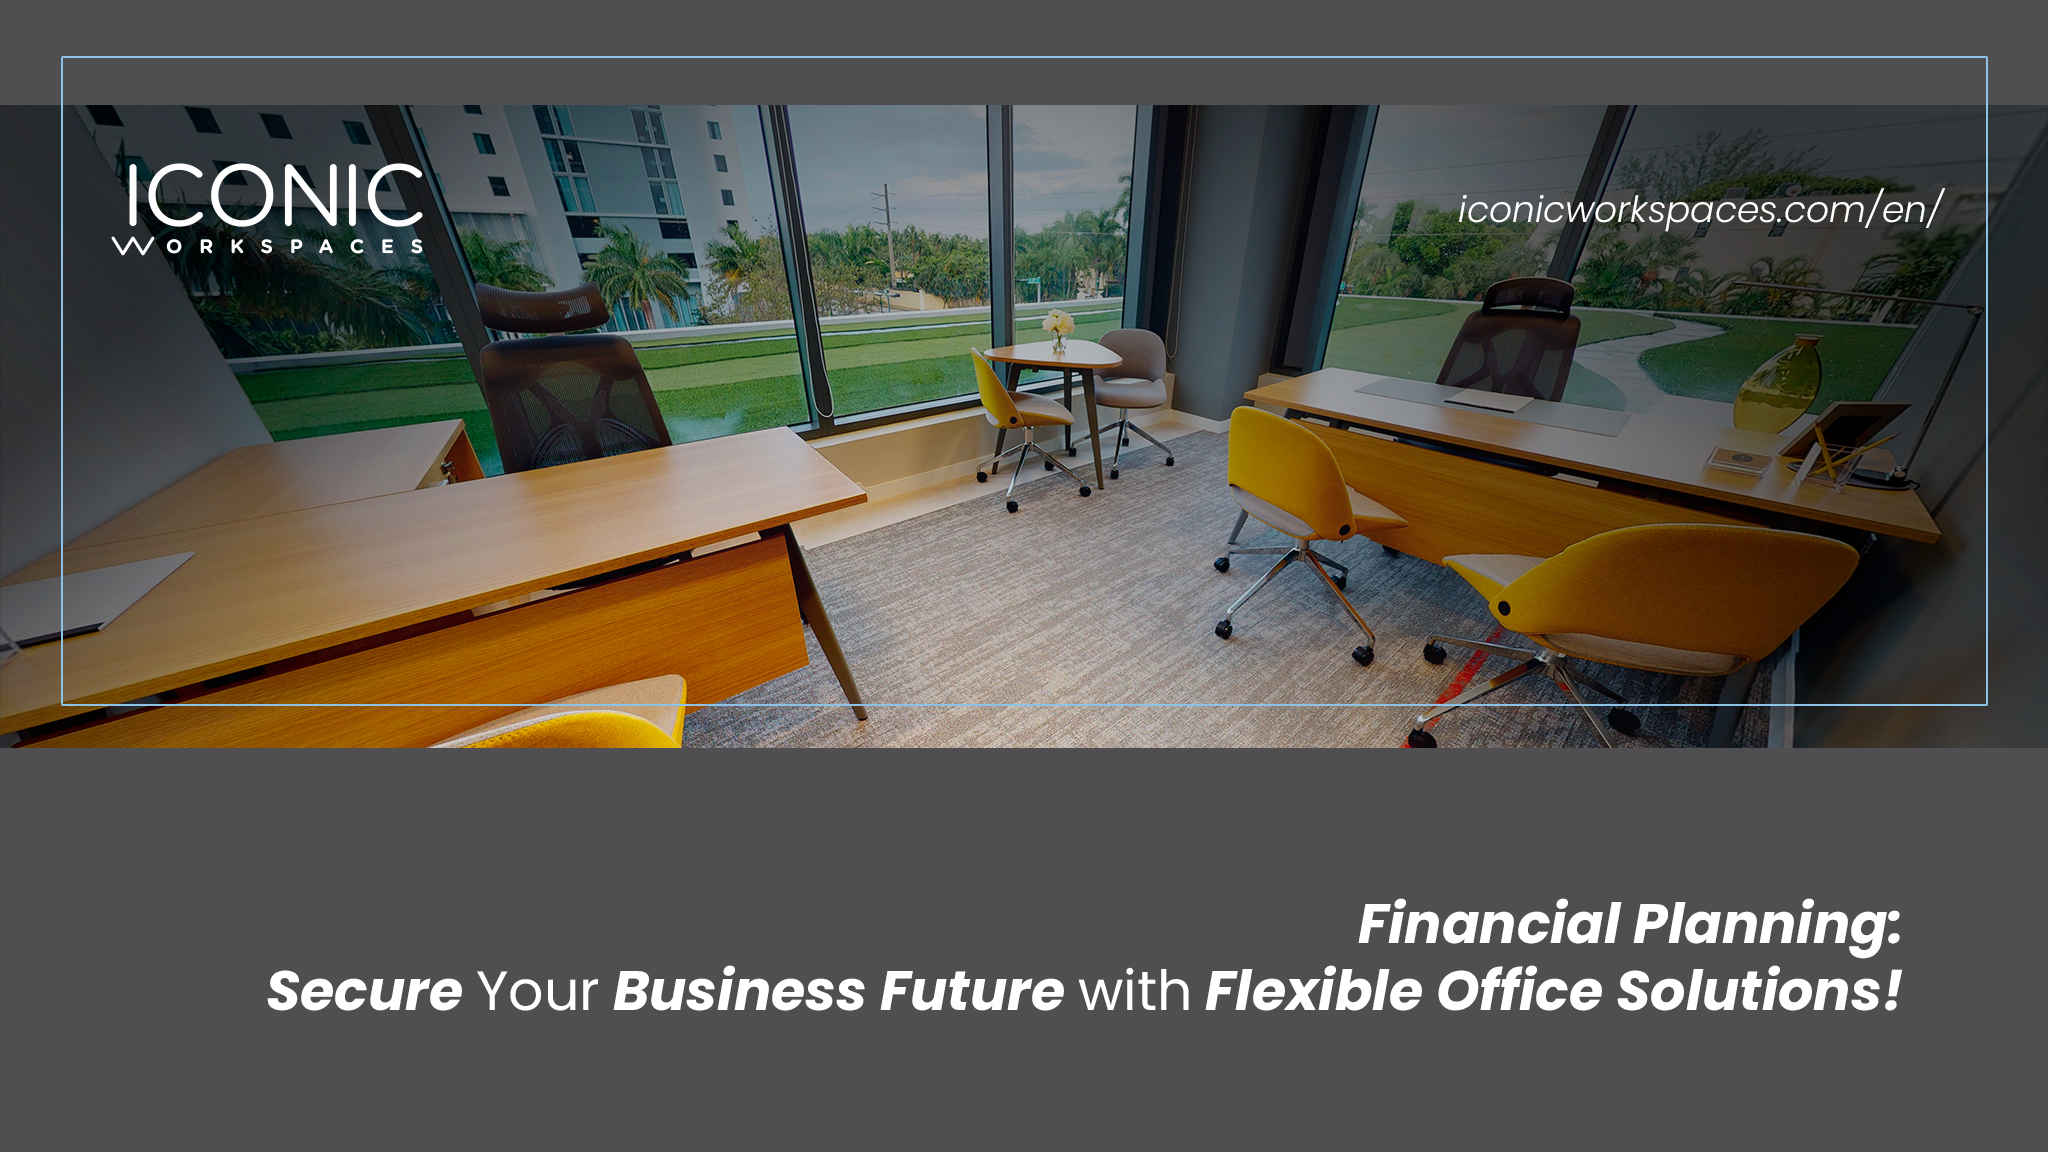 Financial Planning: Secure Your Business Future with Flexible Office Solutions